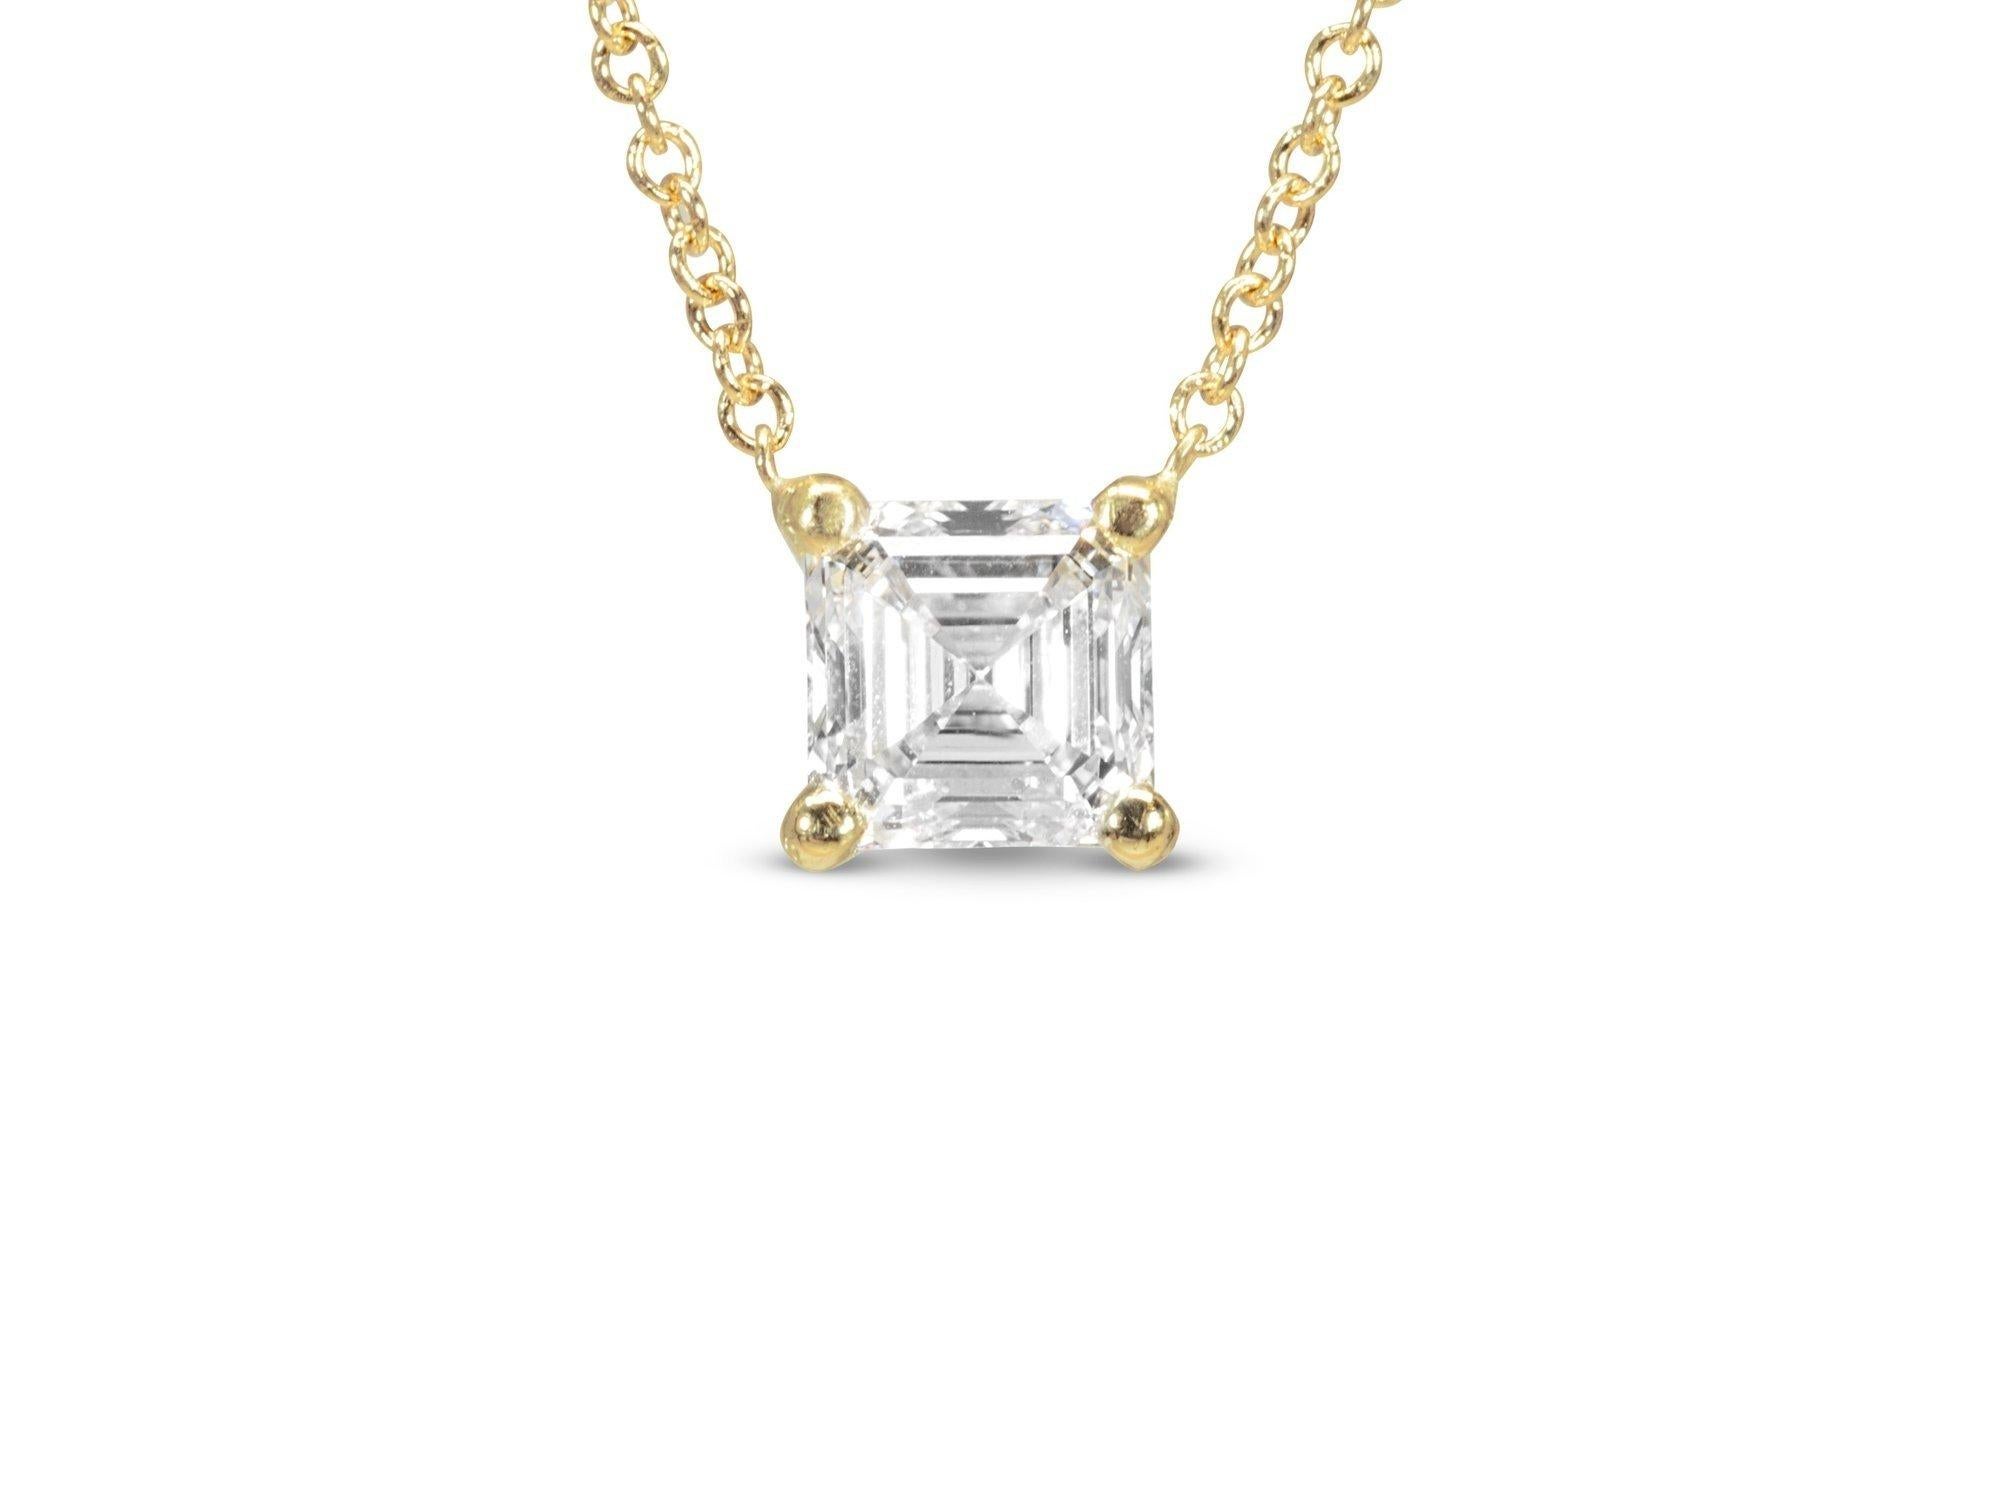 Square Cut Stunning Necklace with a dazzling 1-carat square cut natural diamond